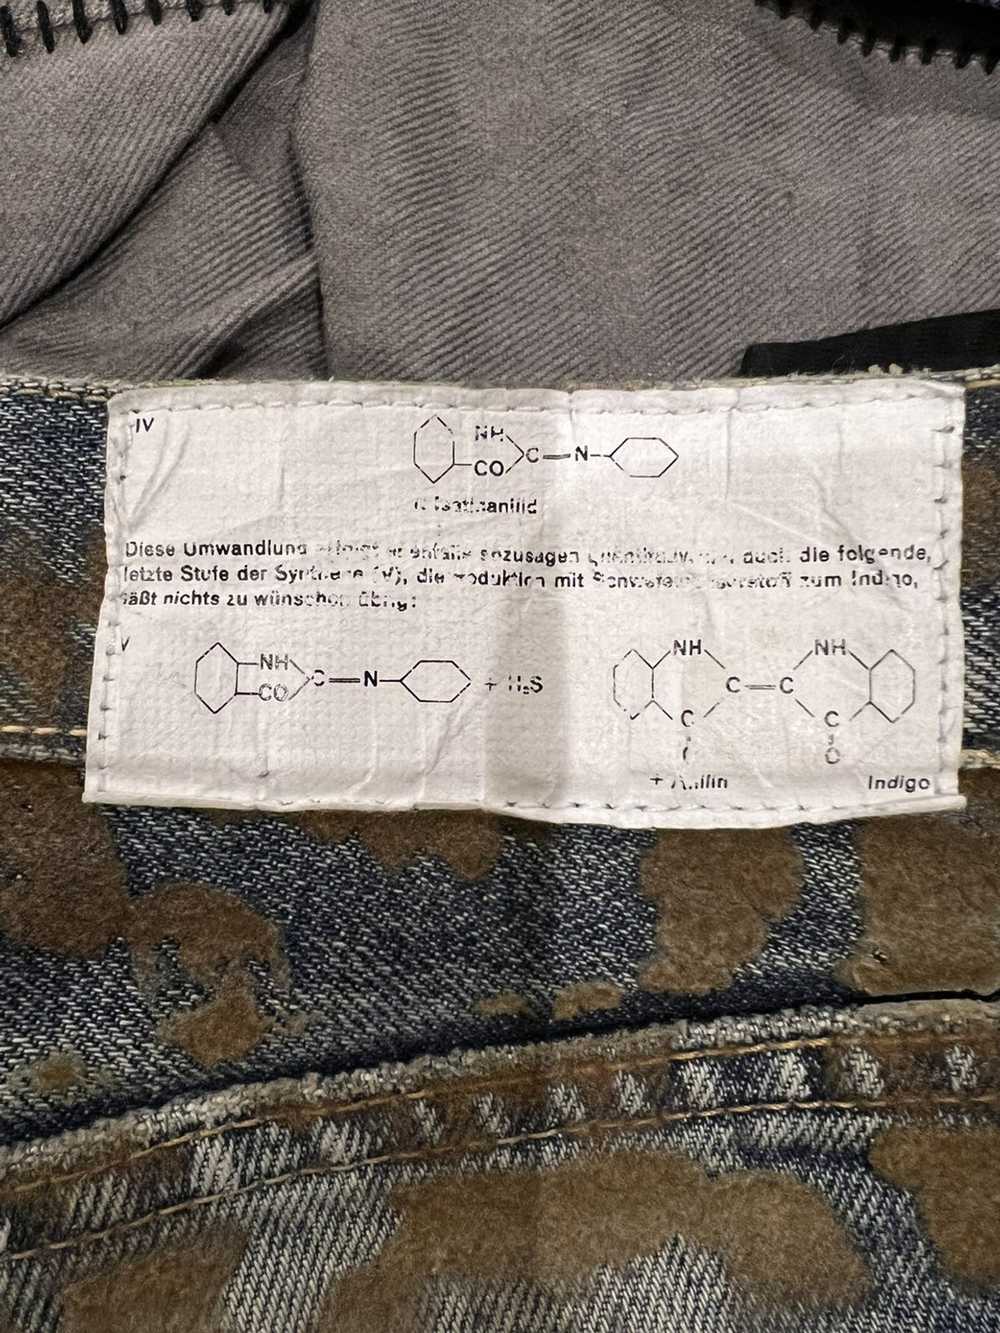 Undercover Undercover Printed Denim Jeans - image 6